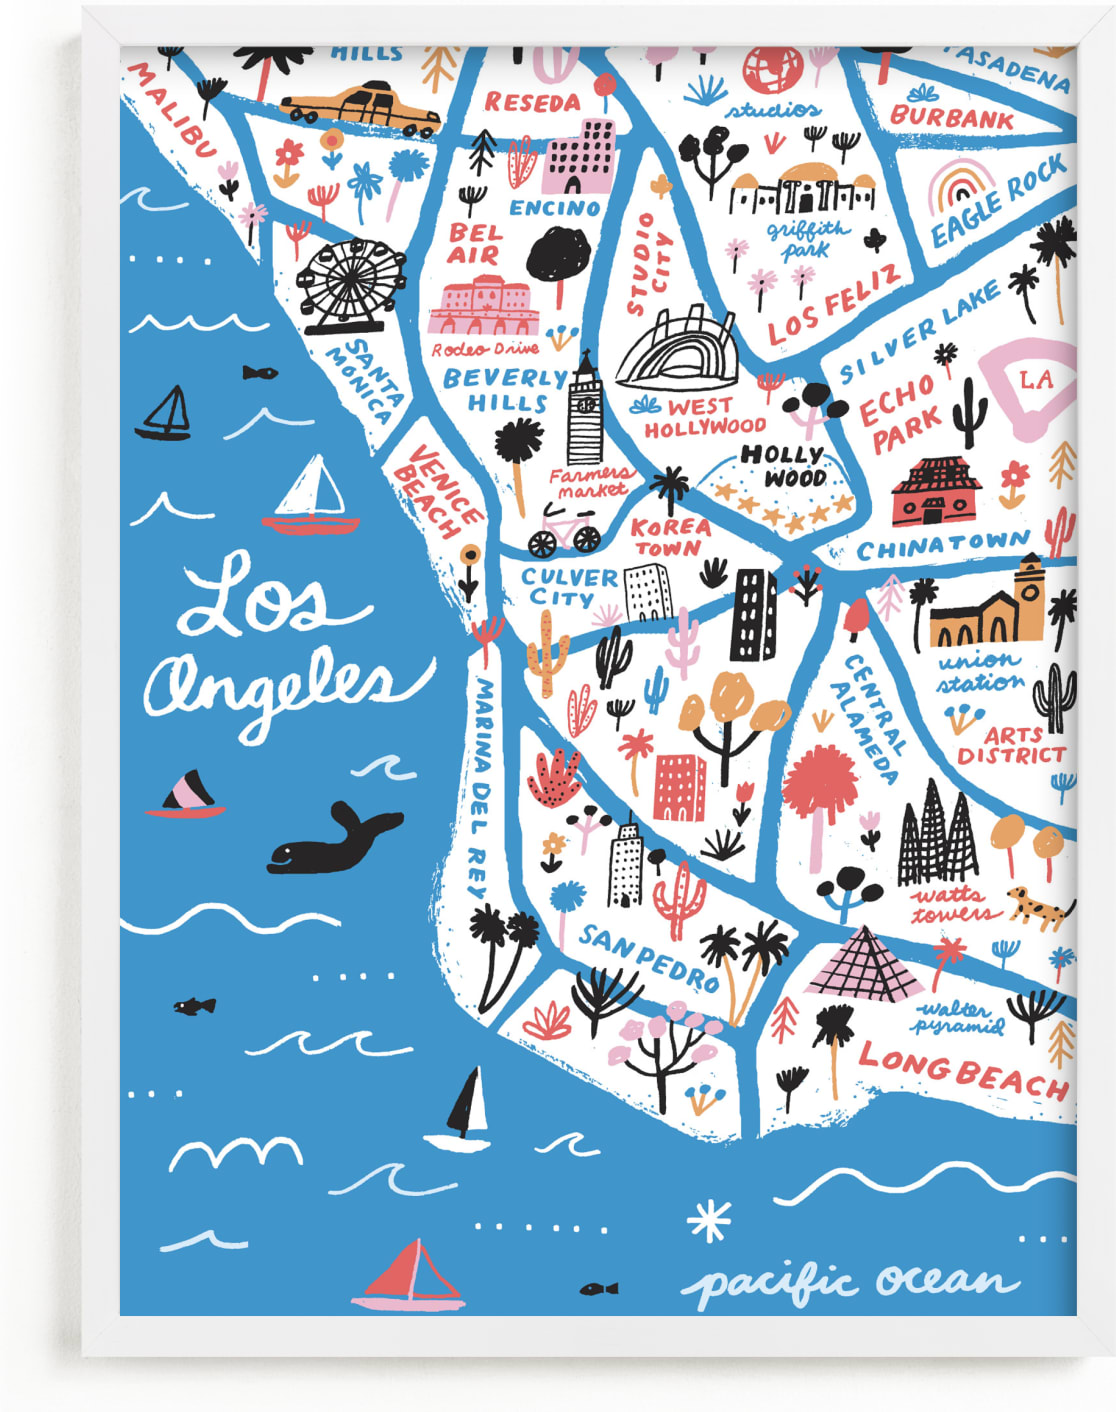 This is a blue art by Jordan Sondler called I Love Los Angeles.